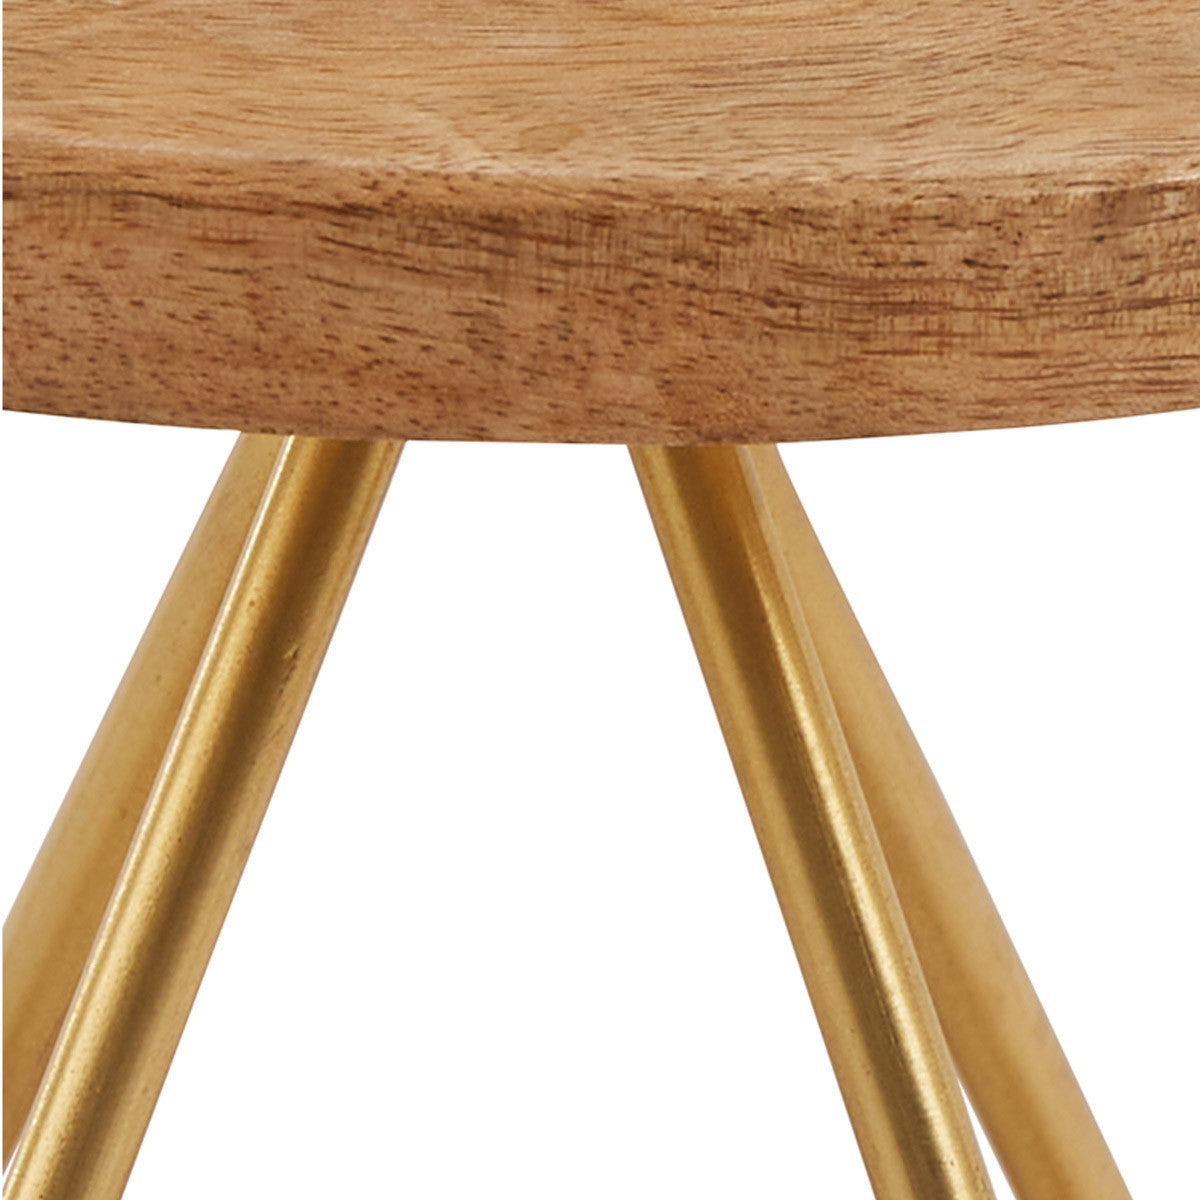 Wood/Gold Triangle Serving Stand Short - Park Designs